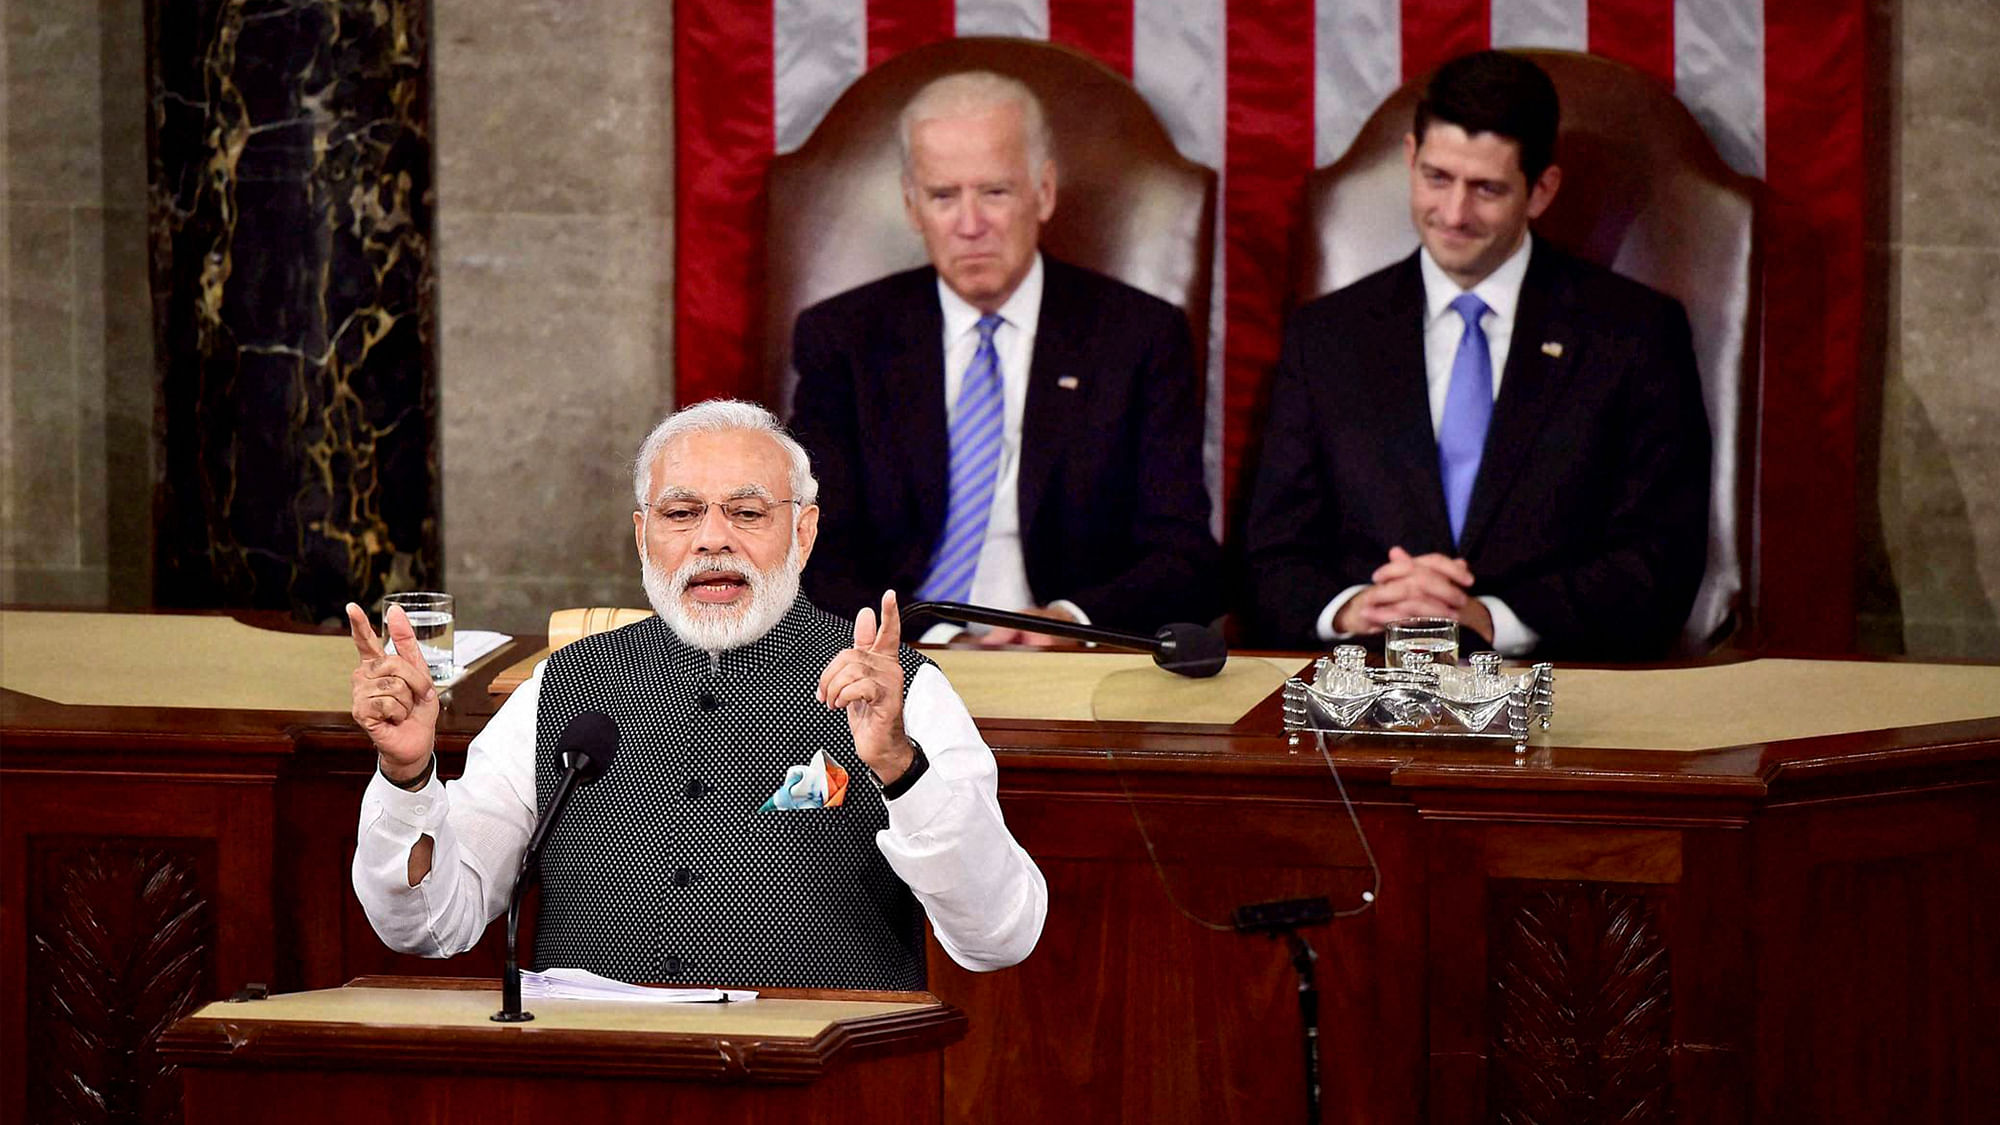 

Prime Minister Narendra Modi gestures while addressing a joint meeting of Congress on Capitol Hill in Washington on Wednesday. Vice President Joe Biden and House Speaker Paul D. Ryan are seen at the behind. (Photo: PTI)